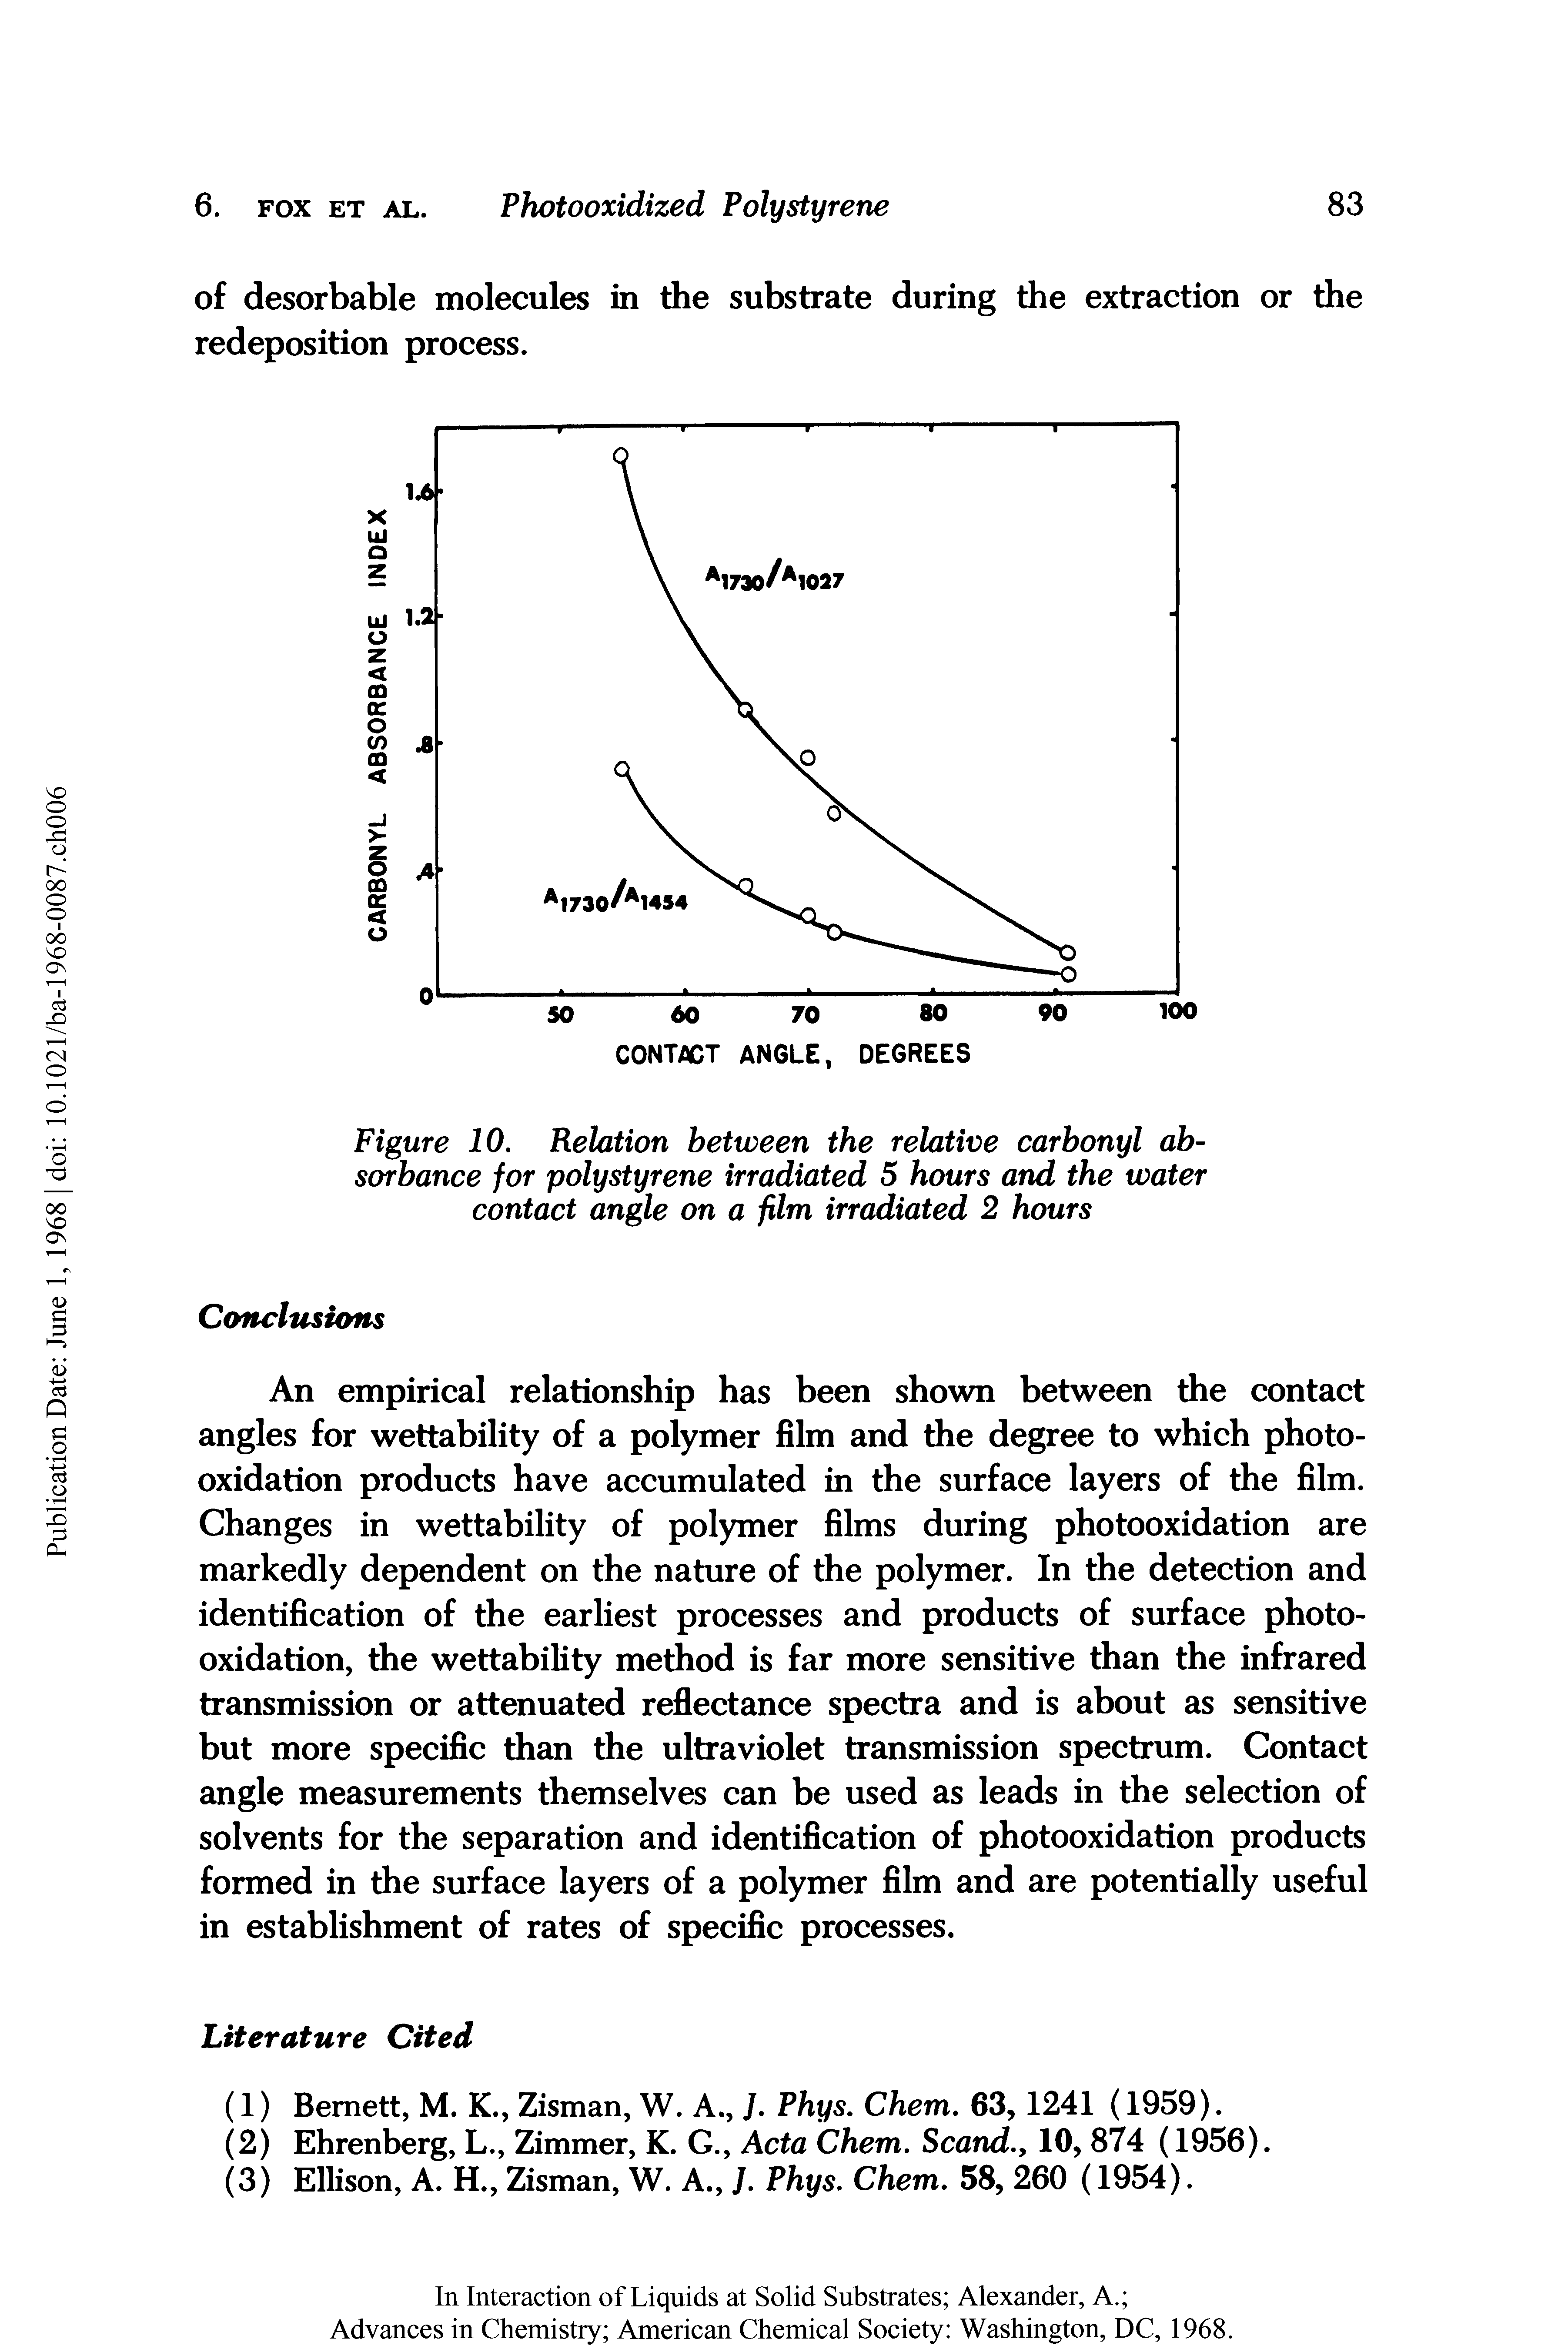 Figure 10. Relation between the relative carbonyl absorbance for polystyrene irradiated 5 hours and the water contact angle on a film irradiated 2 hours...